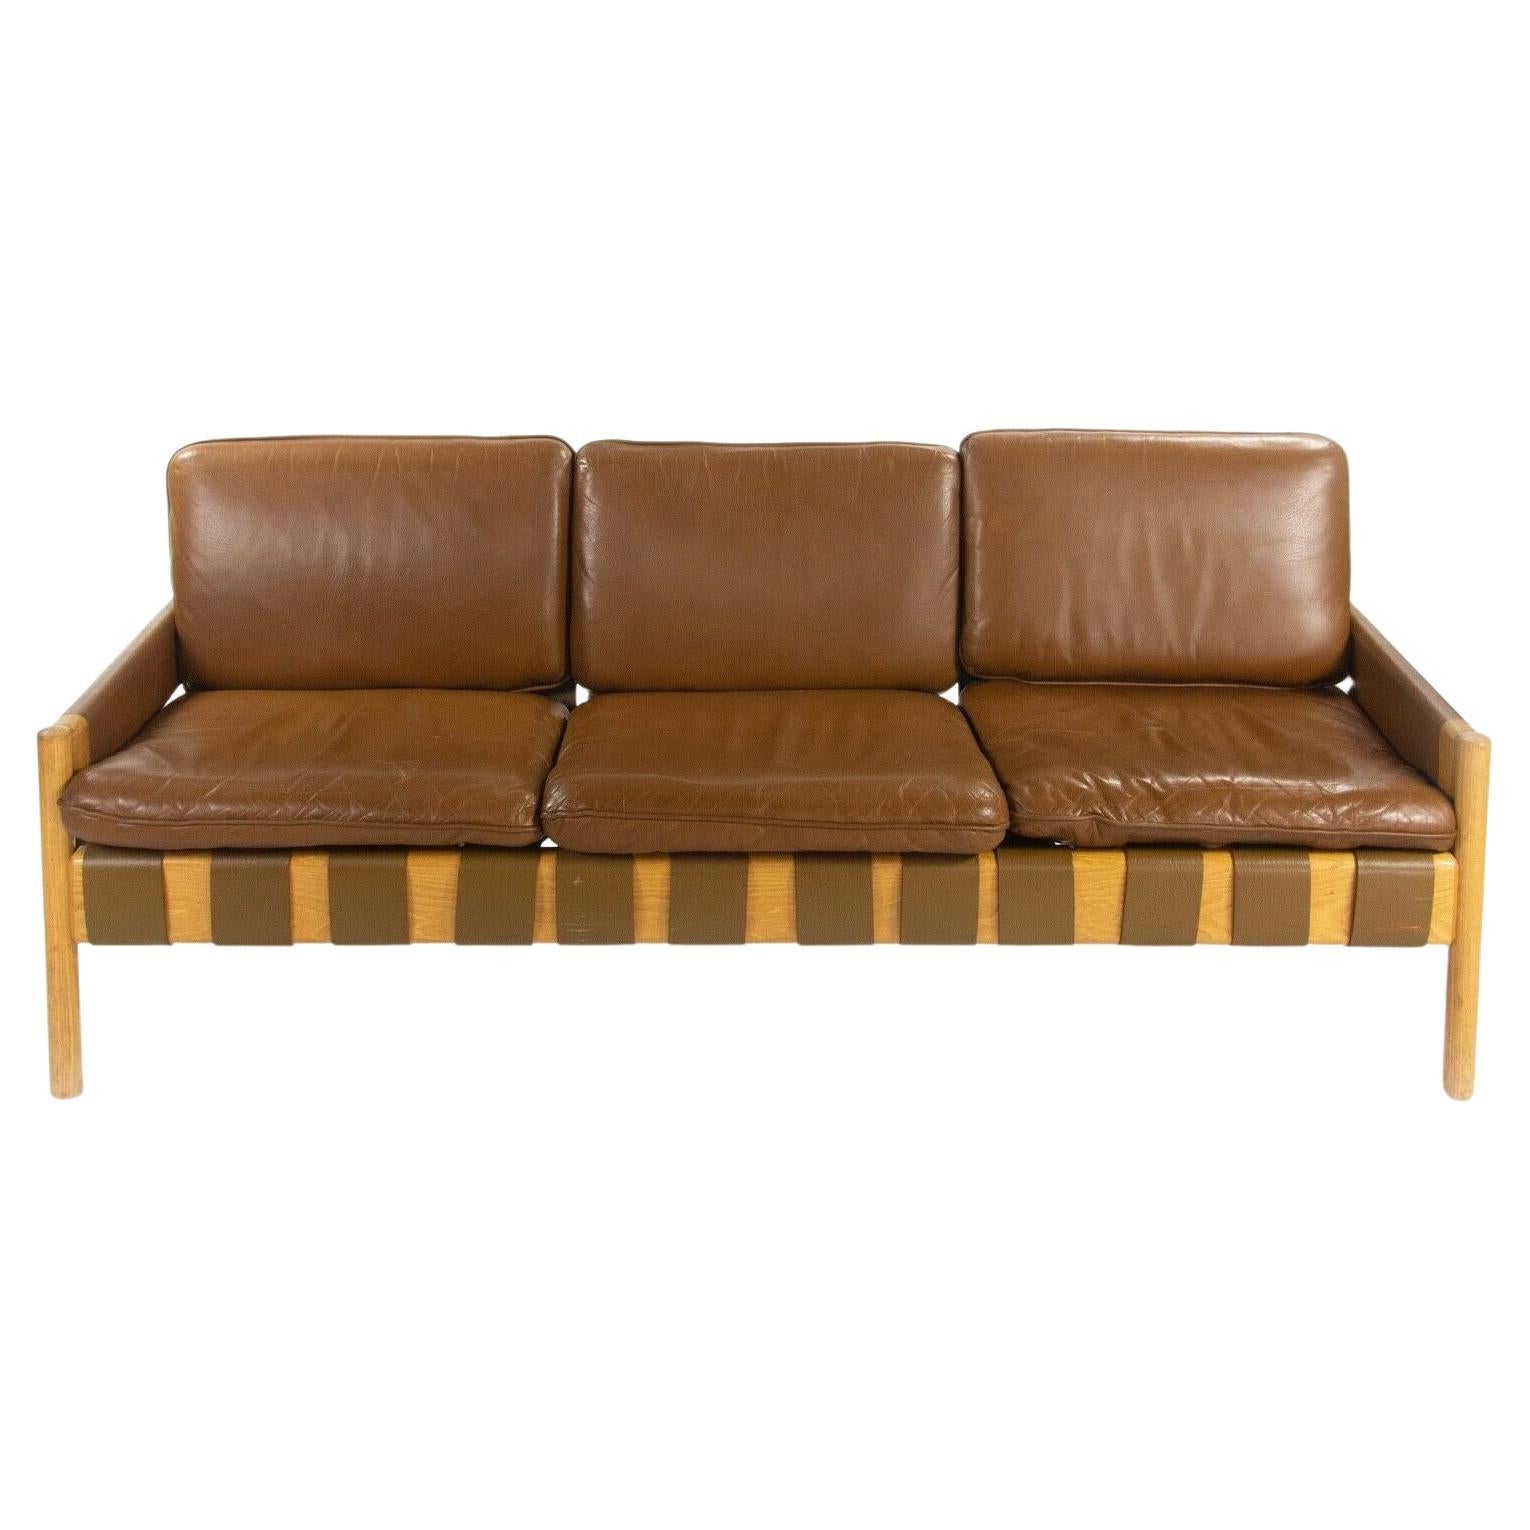 1976 Nicos Zographos Saronis Leather & Oak Sofa from Hugh Stubbins Library For Sale